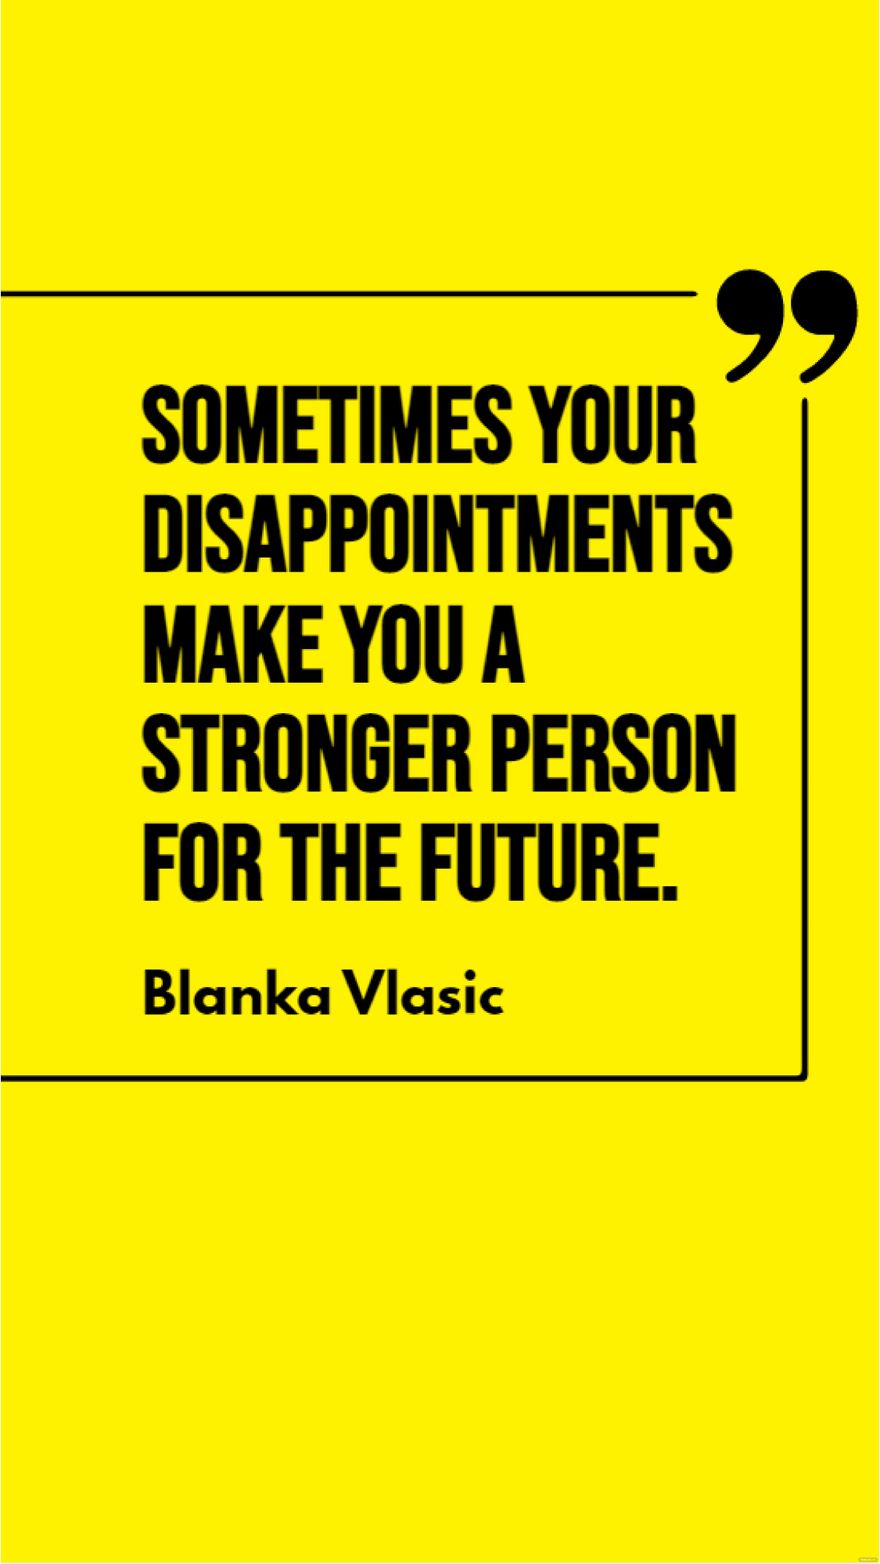 Blanka Vlasic - Sometimes your disappointments make you a stronger person for the future.